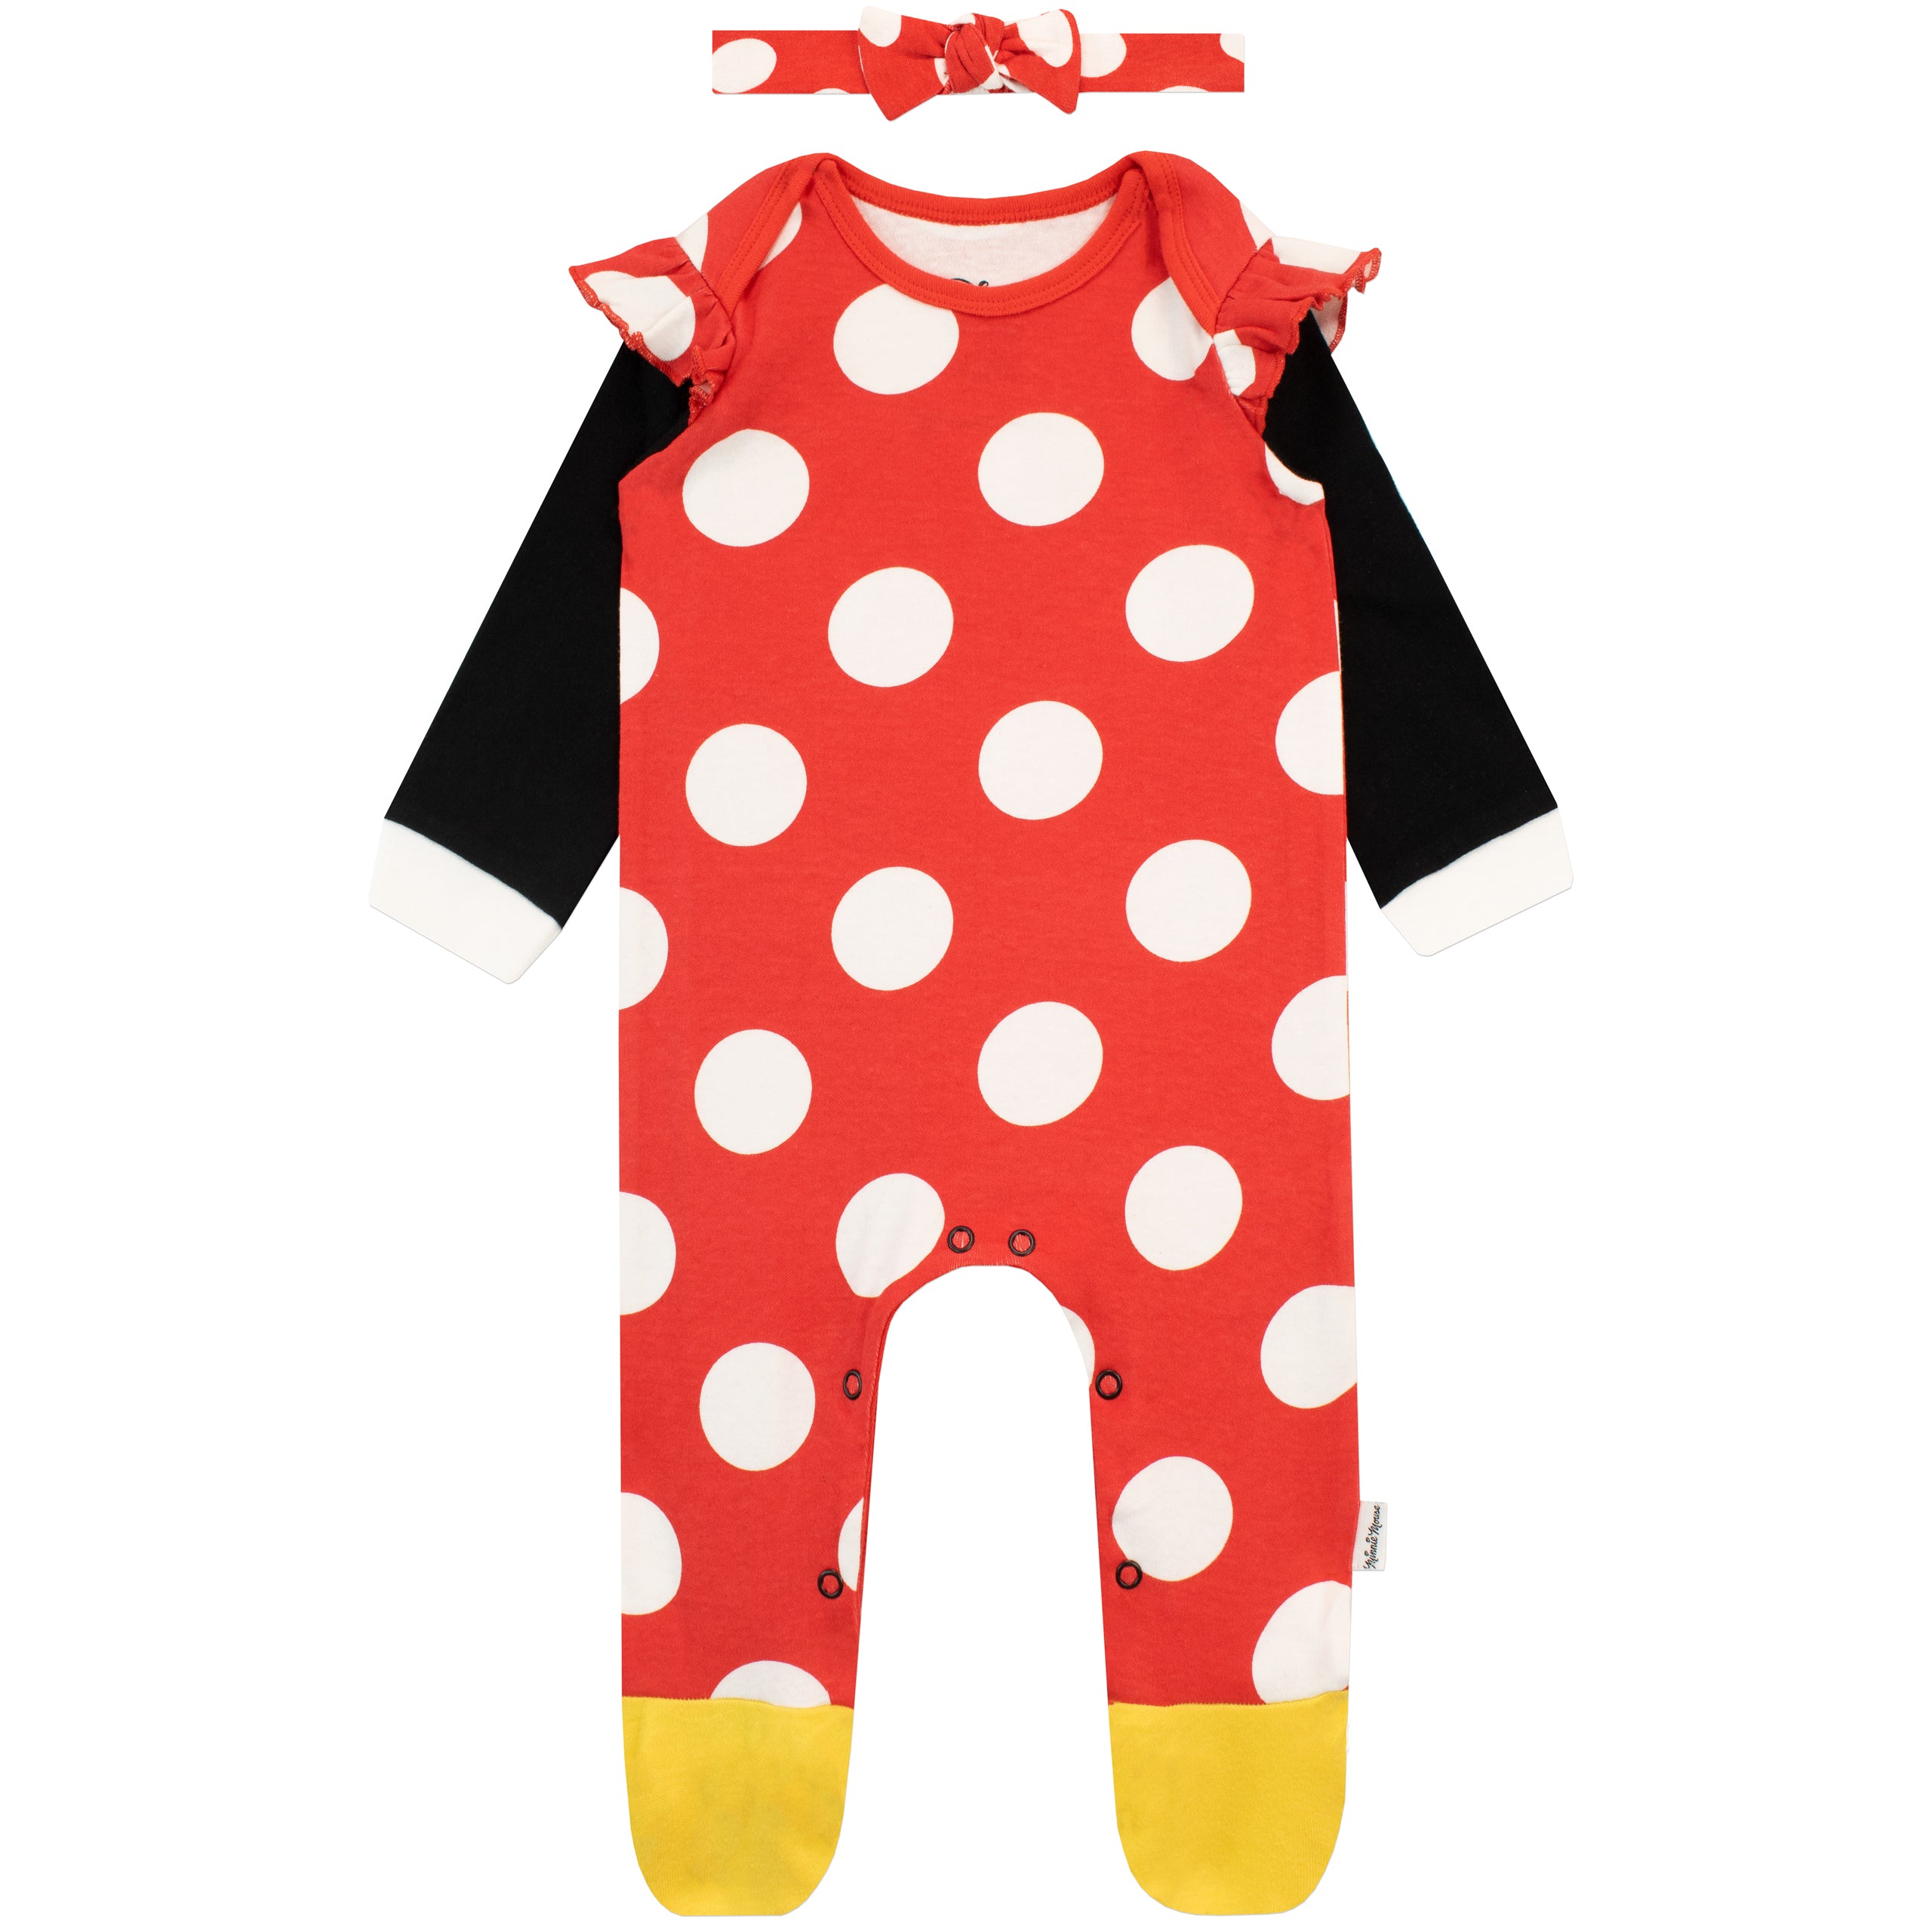 Adorable Minnie Mouse Costumes, Dress and Accessories